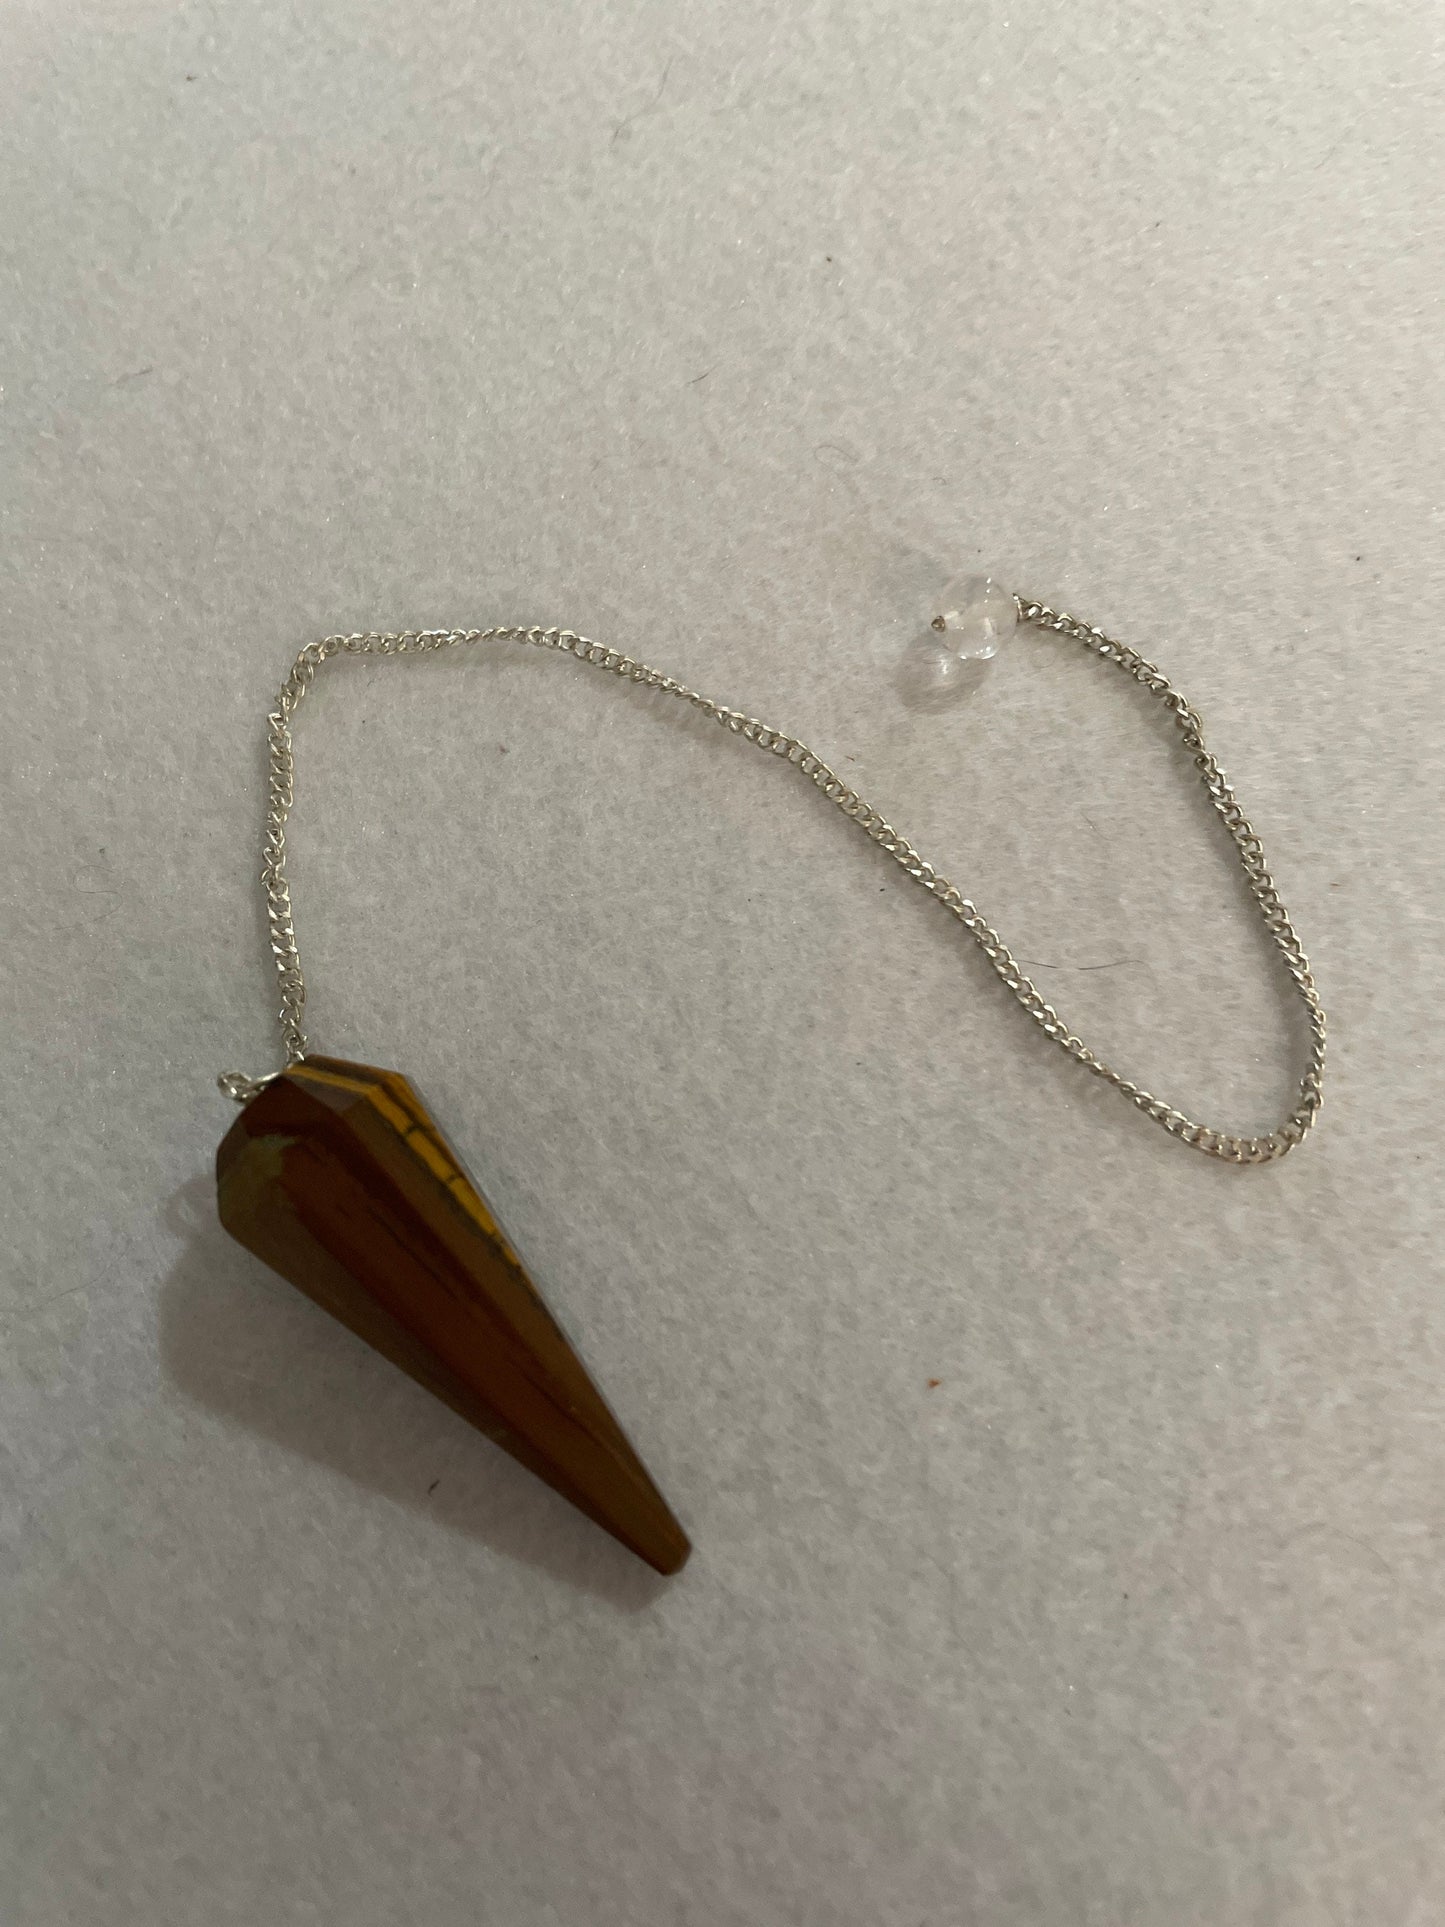 Beautiful Tiger’s Eye pendulum ornaments perfect for dowsing. Hang it in a well lit window, from the ceiling or on the wall!